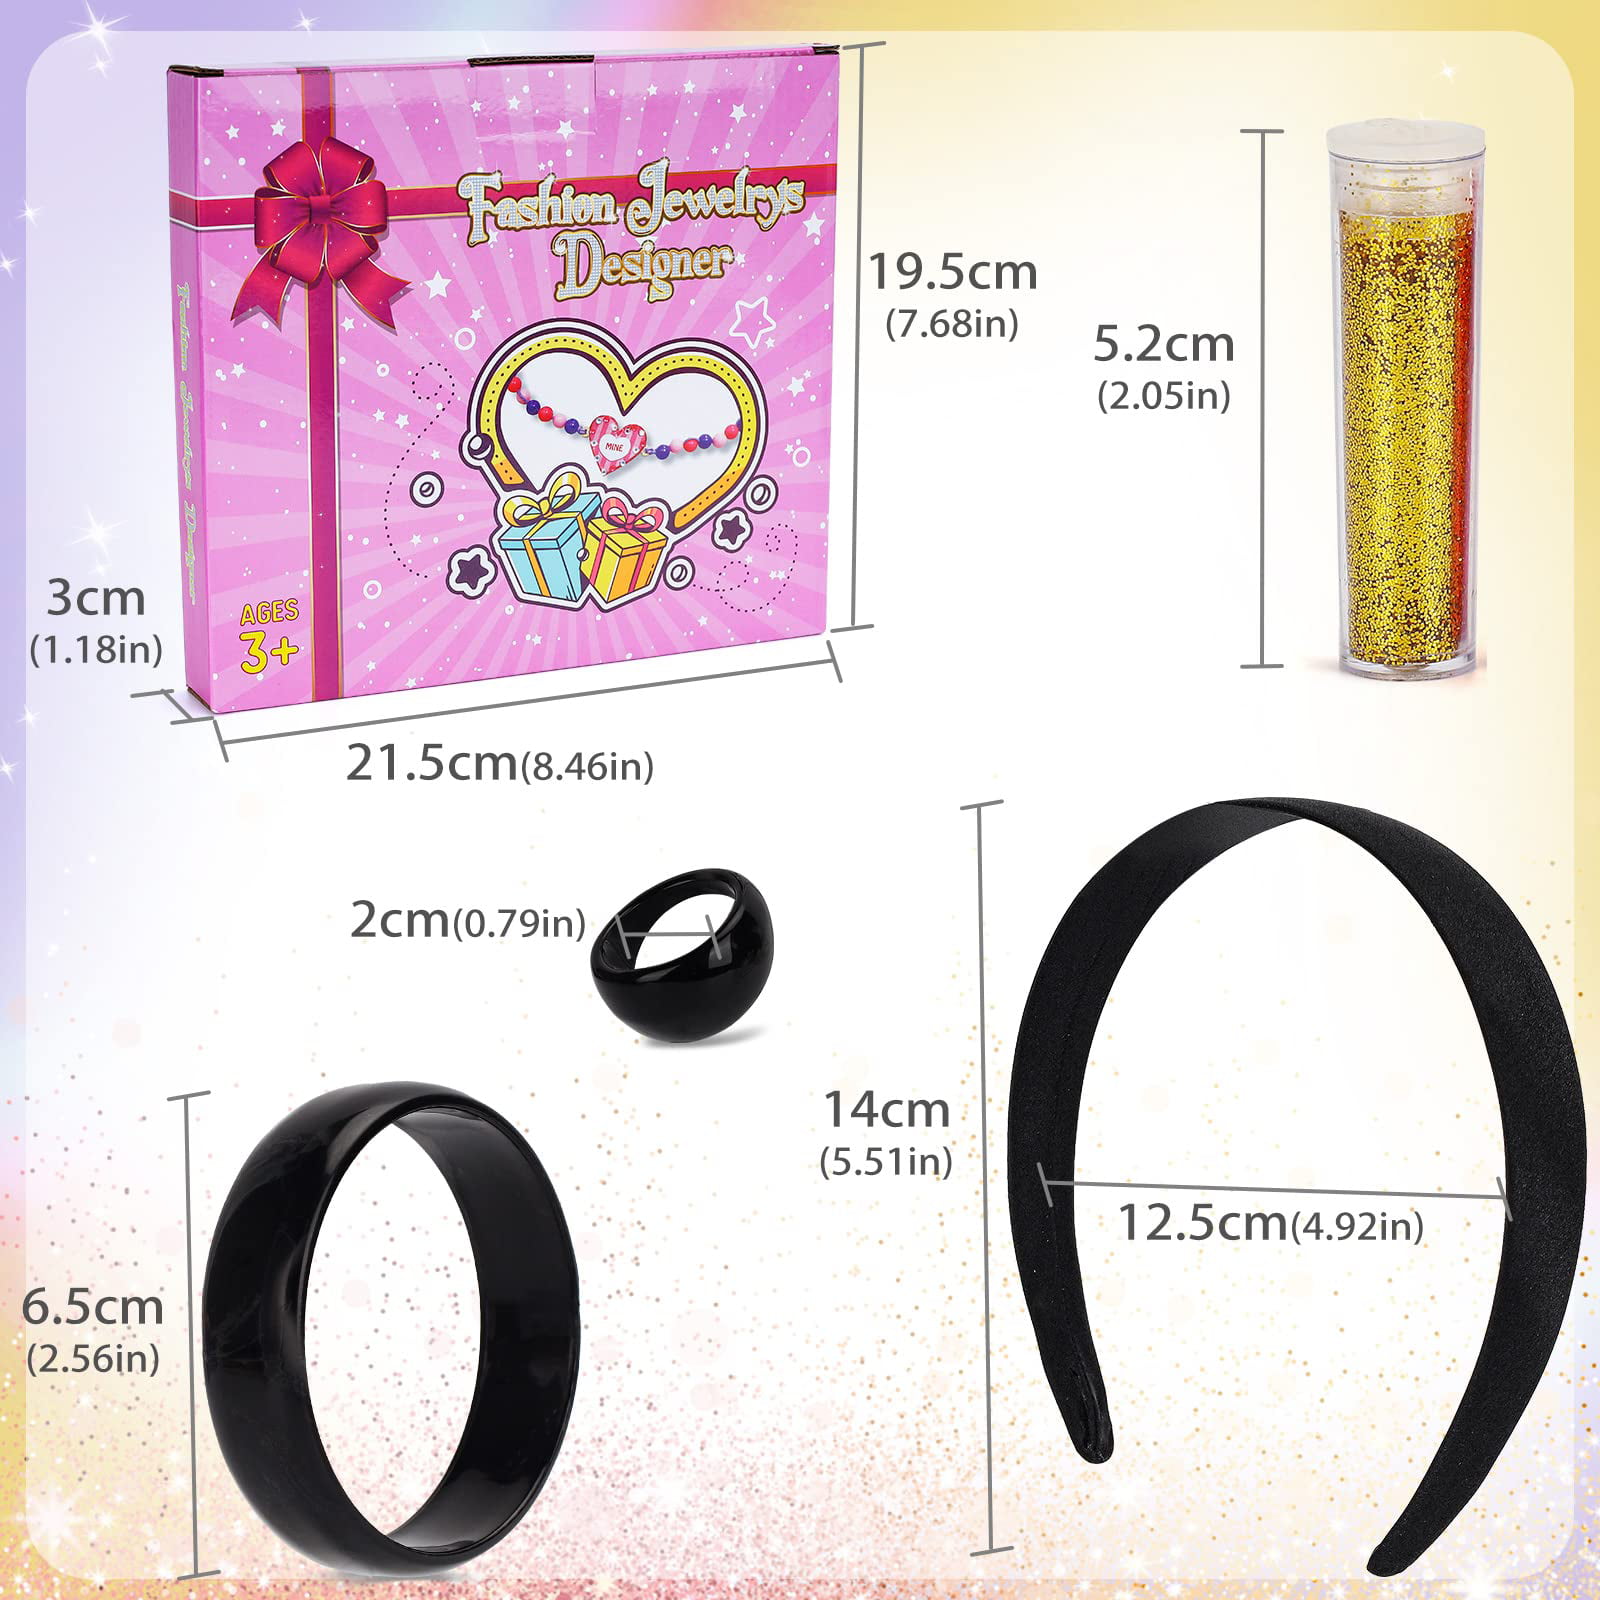  Hair Accessories Mermaid Toys Gifts for Girls: 6 7 8 9 Year Old  Art Crafts Set DIY Jewellery Making Sets for Girl Age 5-12 Hair Gifts  Headbands for Girly Girls Princess